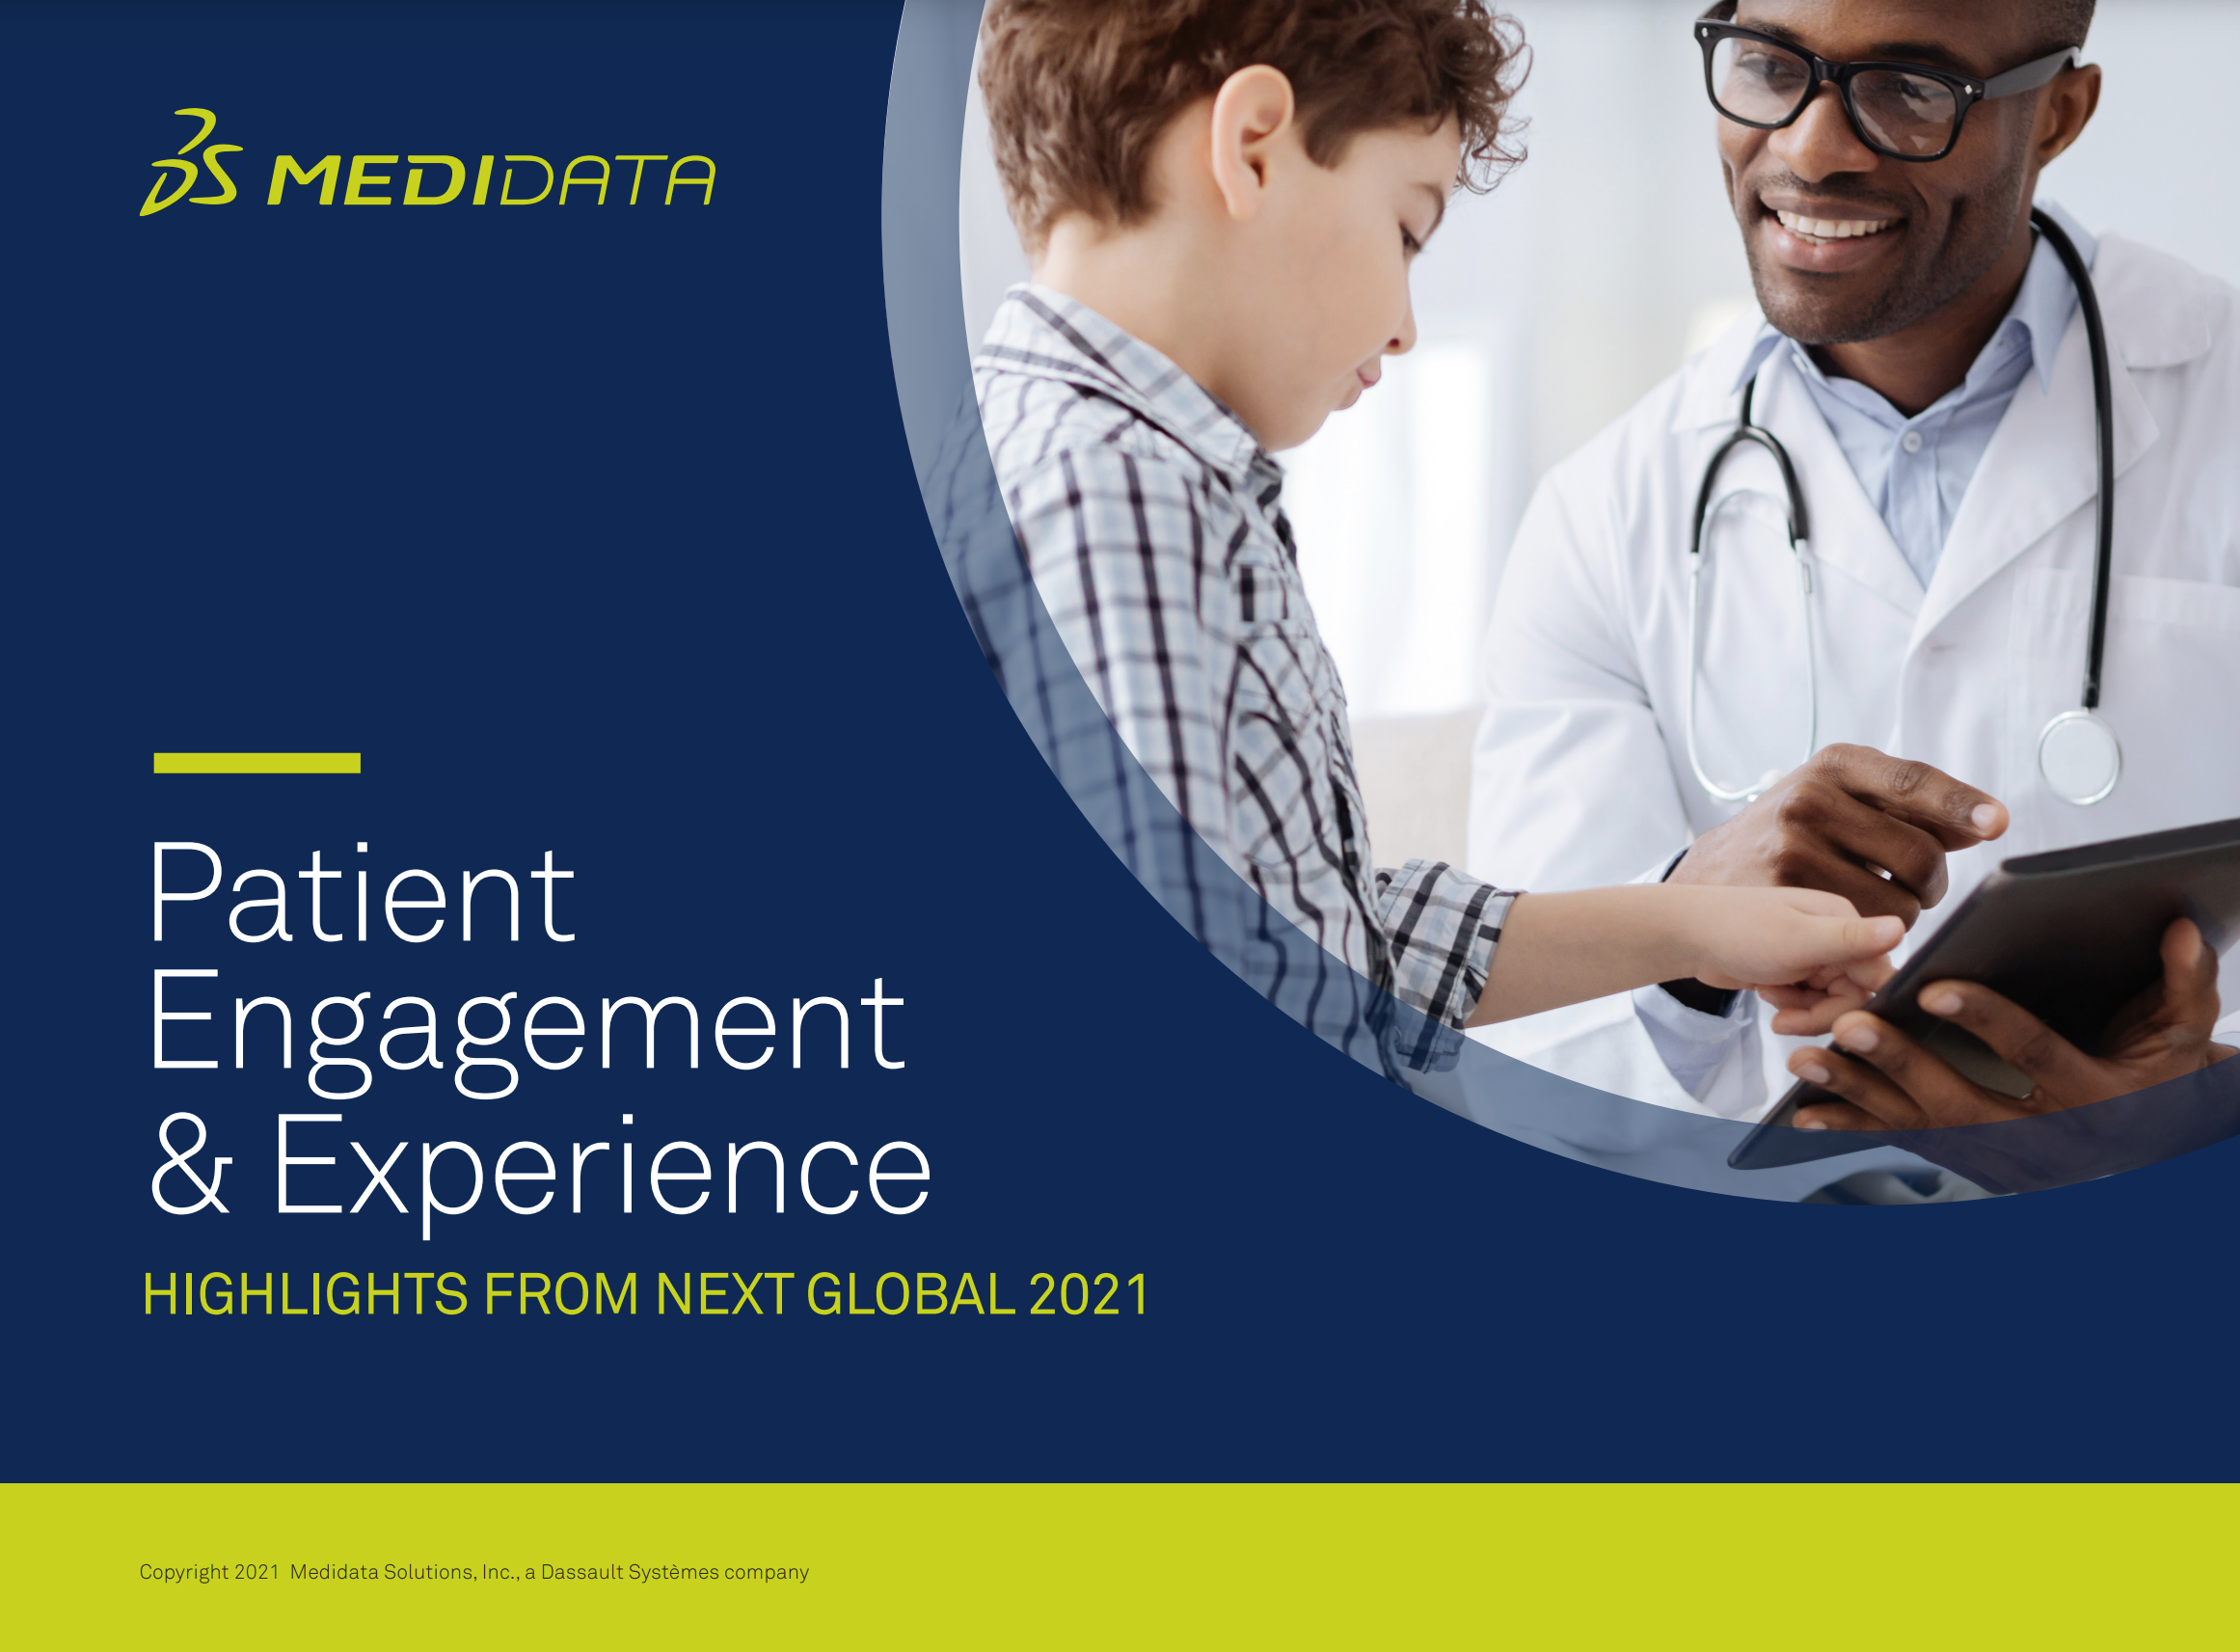 Patient Engagement & Experience Highlights from NEXT Global 2021